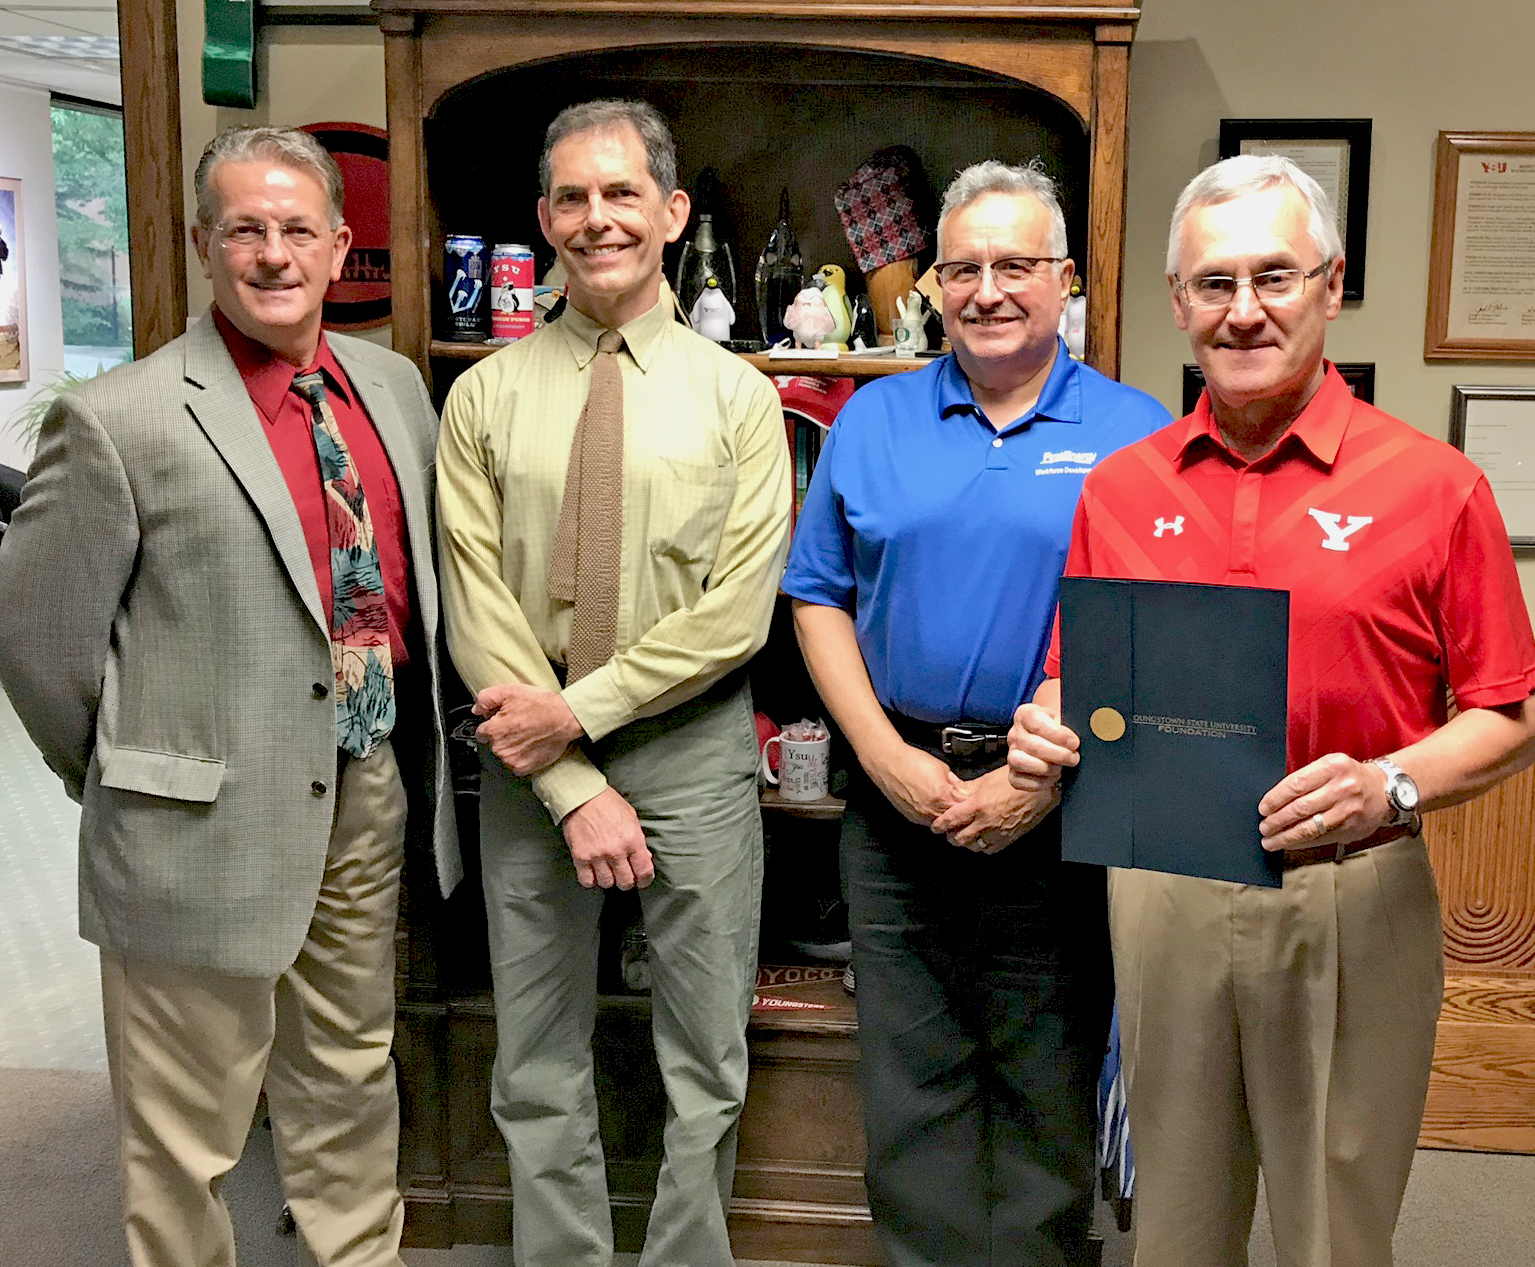 Pictured from the left are Jeffrey Oprean of FirstEnergy Generation LLC, Human Resources.; Dan Coyne, coordinator of the YSU Power Plant Technologies Program; Bob Lampson of FirstEnergy Service Co., Fossil Workforce Development; and YSU President Jim Tressel.